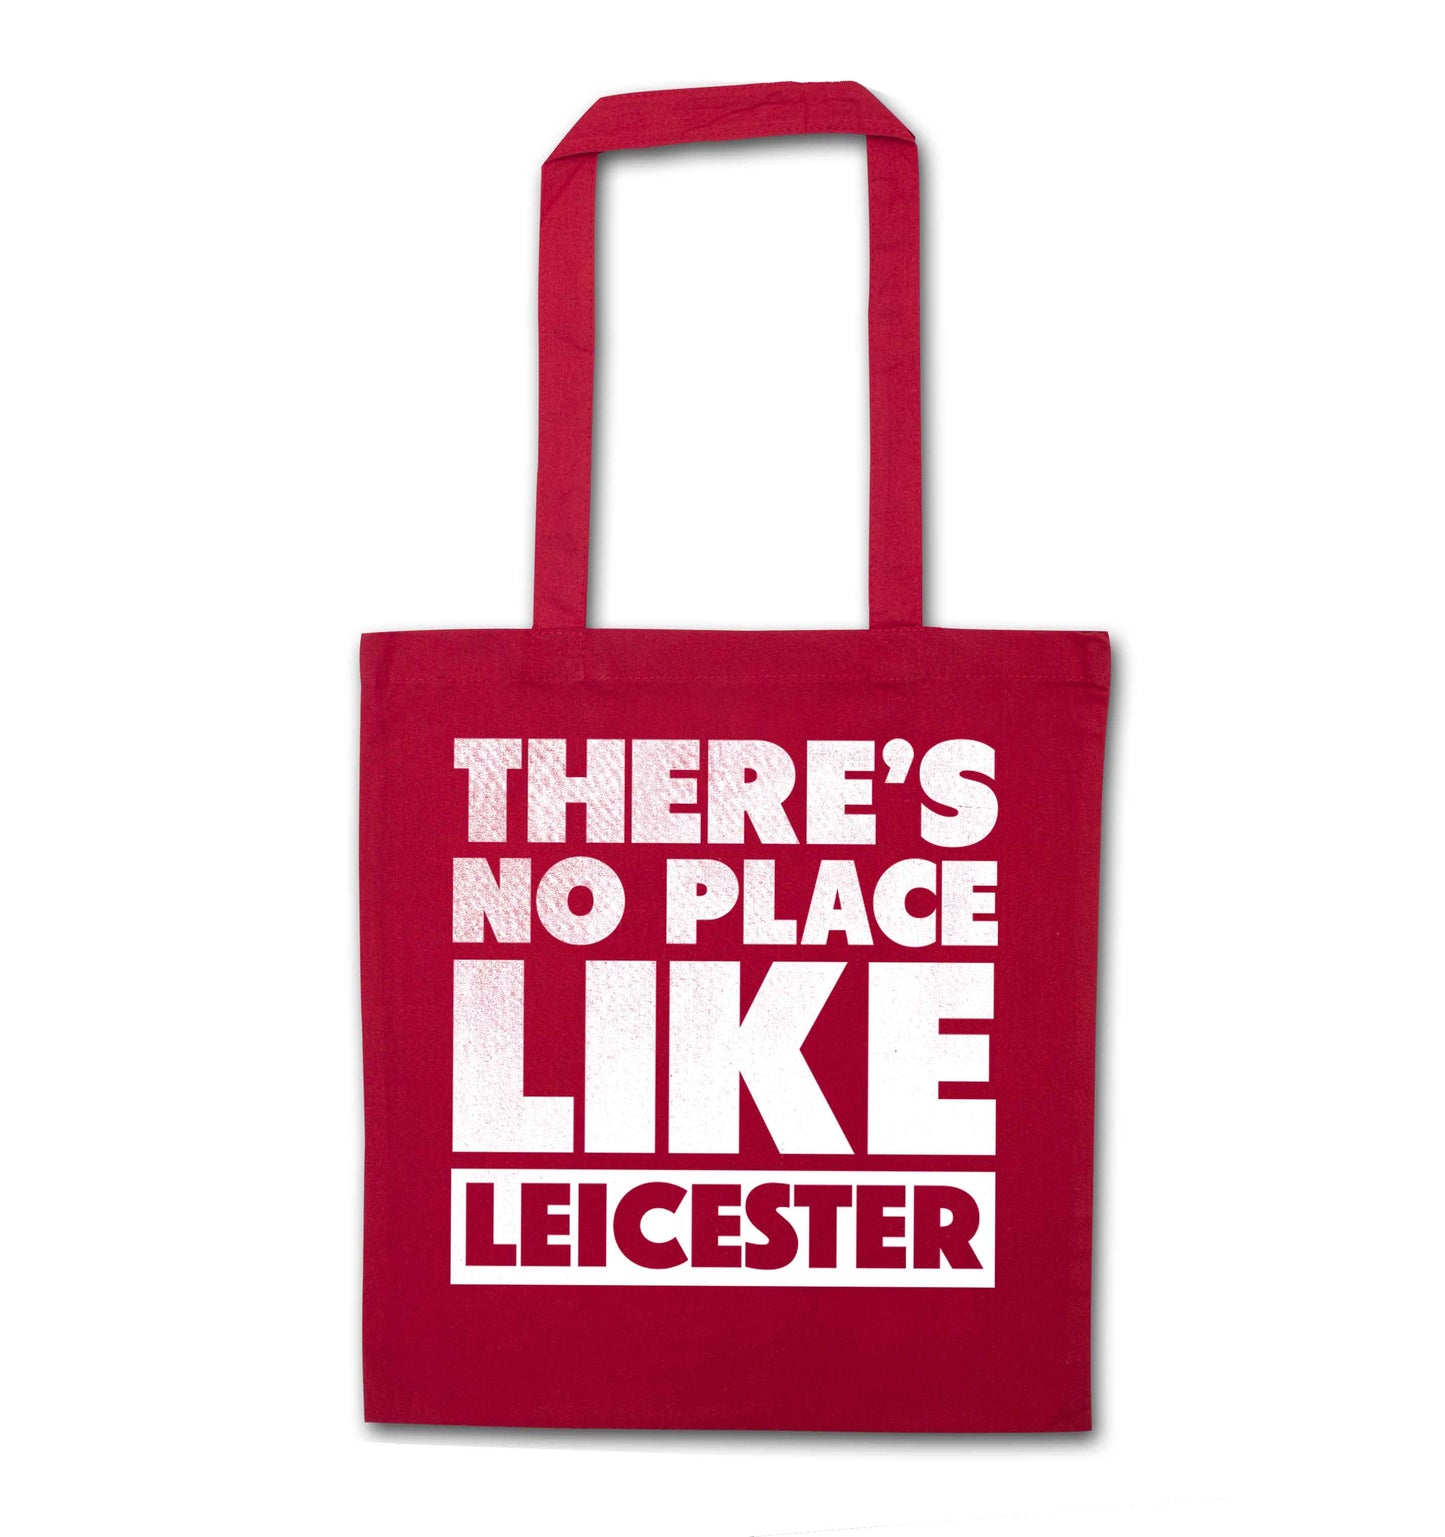 There's no place like Leicester red tote bag